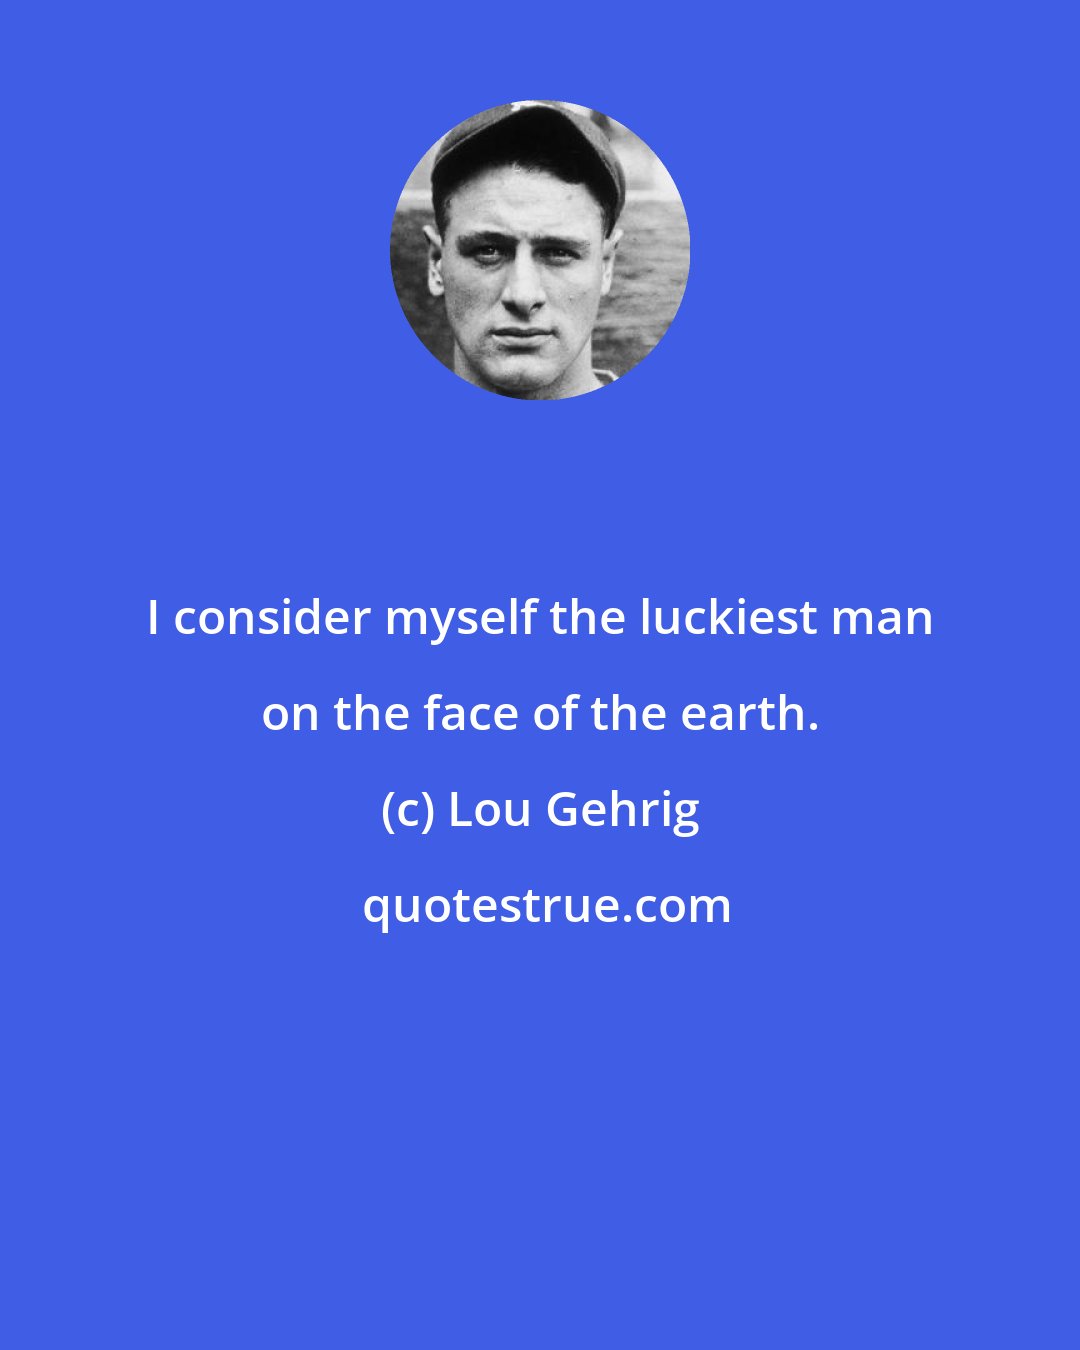 Lou Gehrig: I consider myself the luckiest man on the face of the earth.